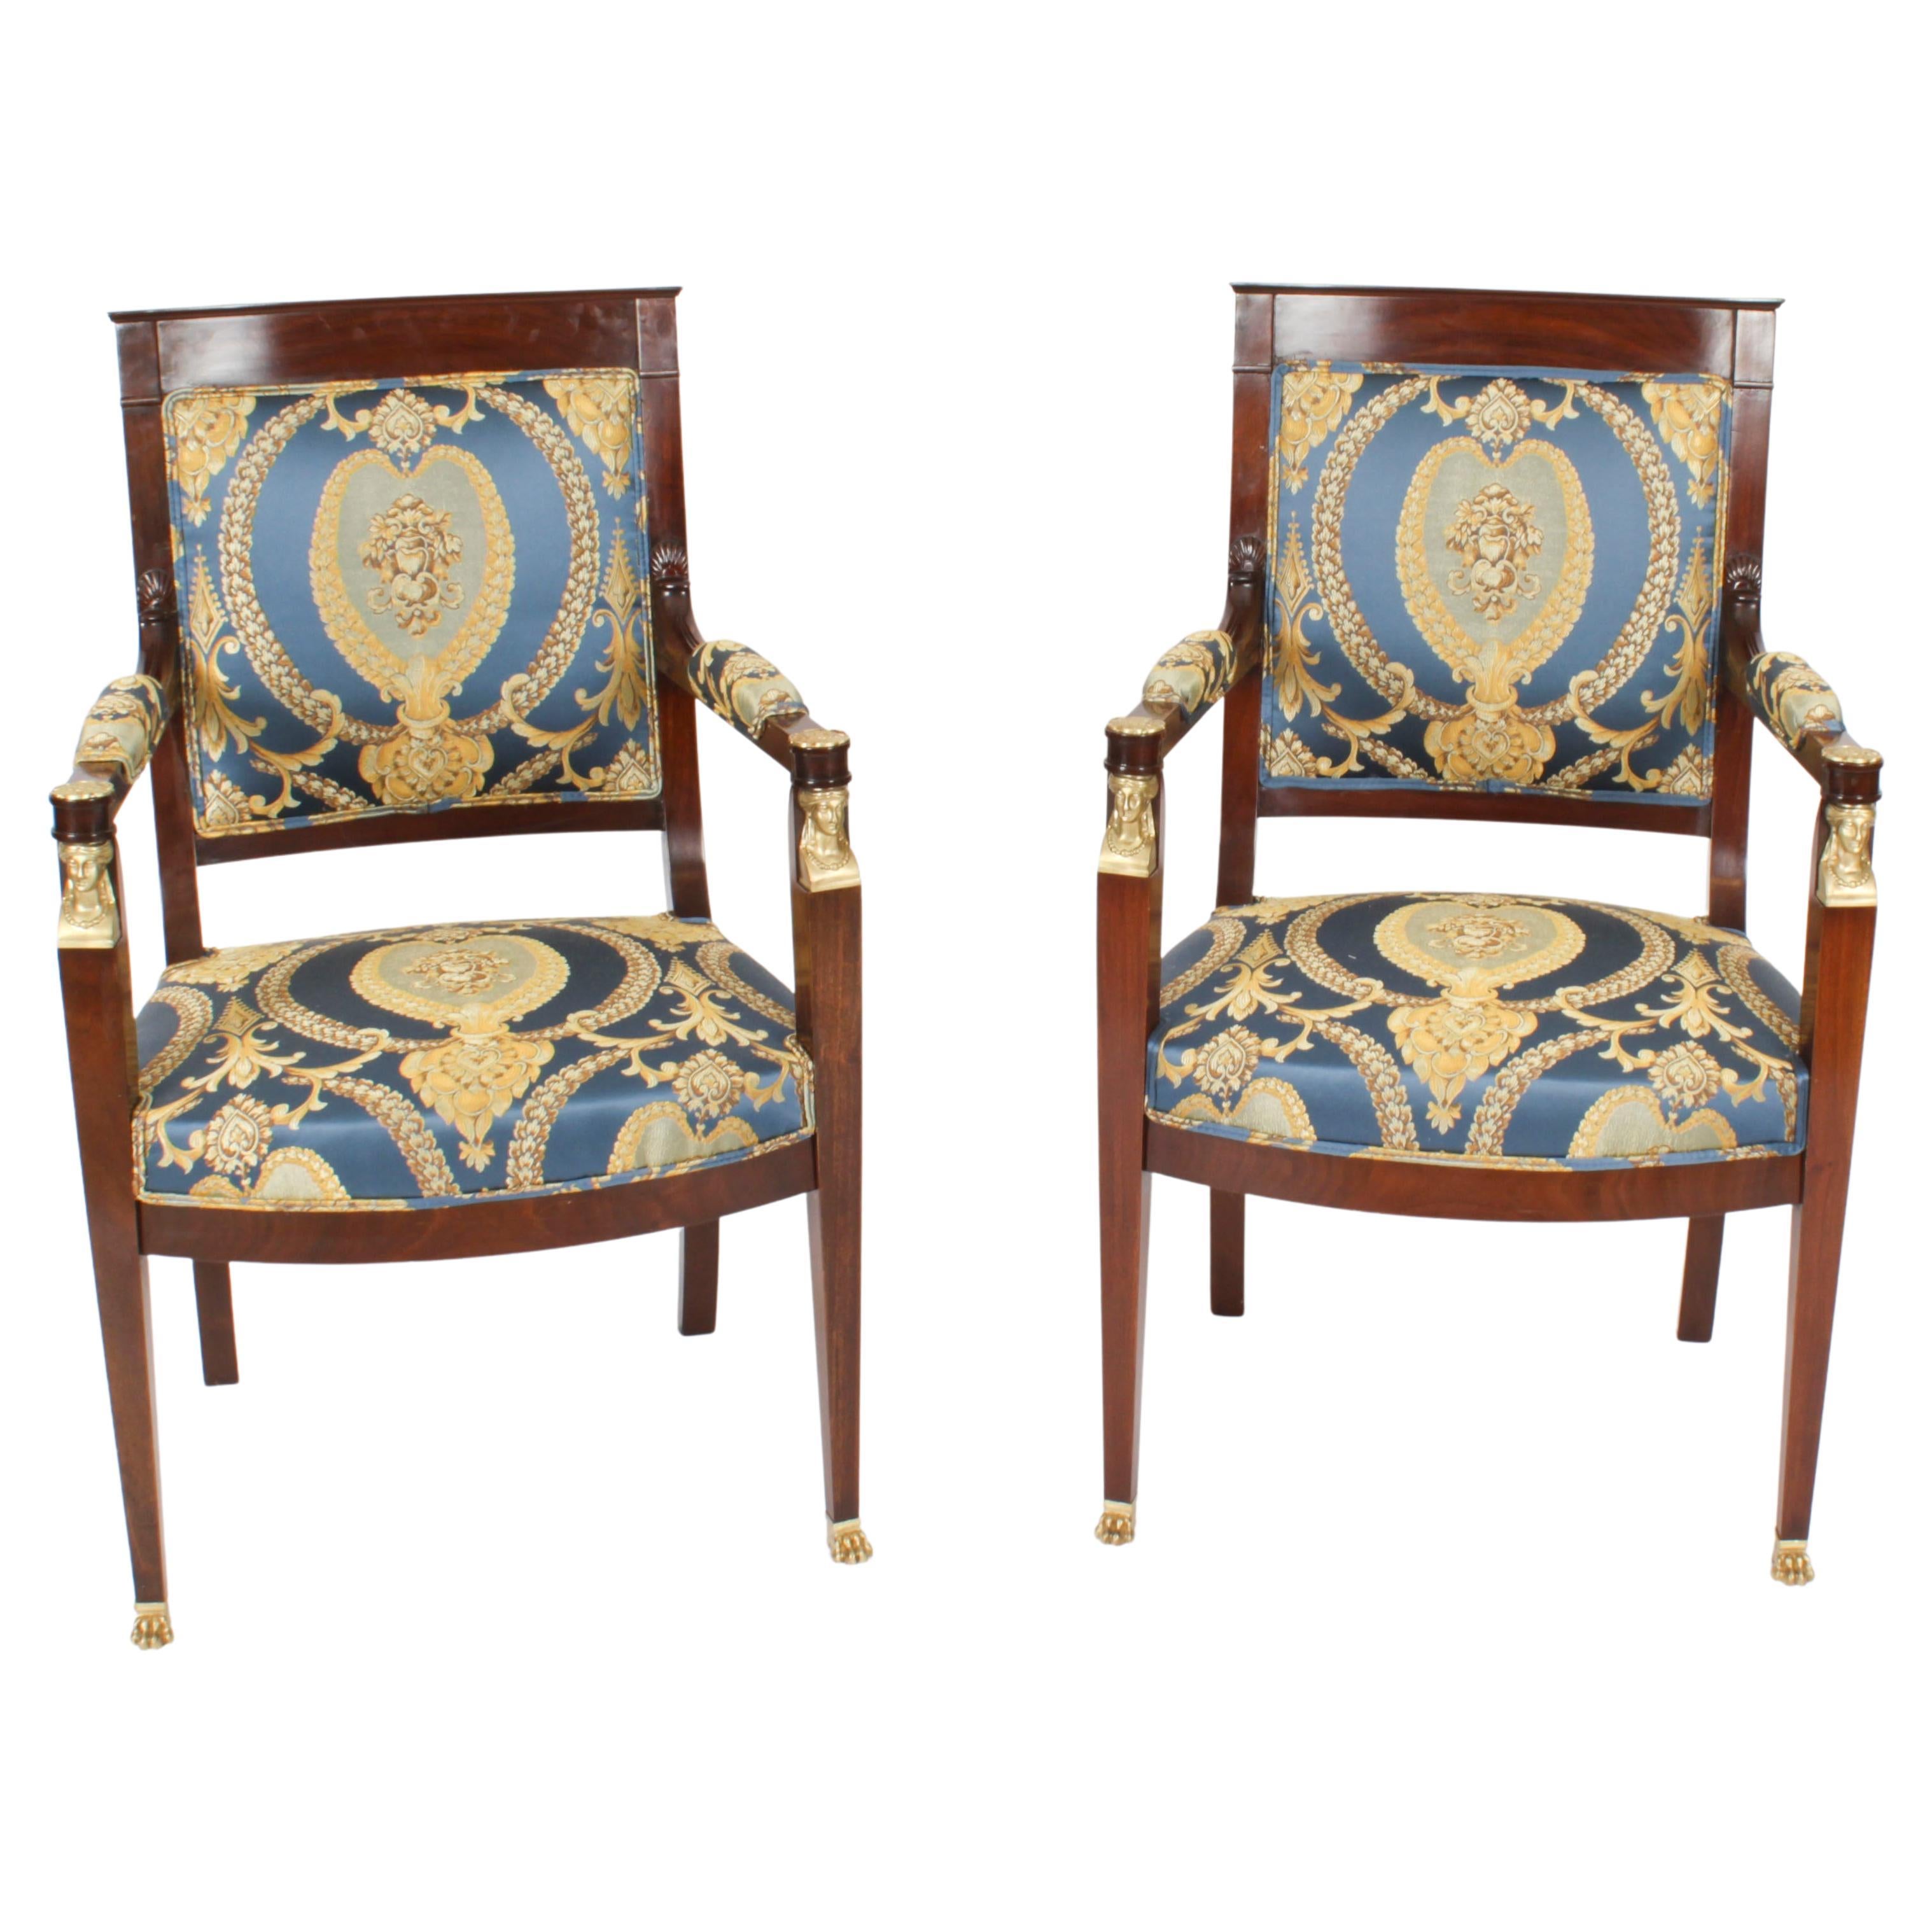 Antique Pair French Empire Revival Ormolu Mounted Armchairs 1870s 19th Century For Sale